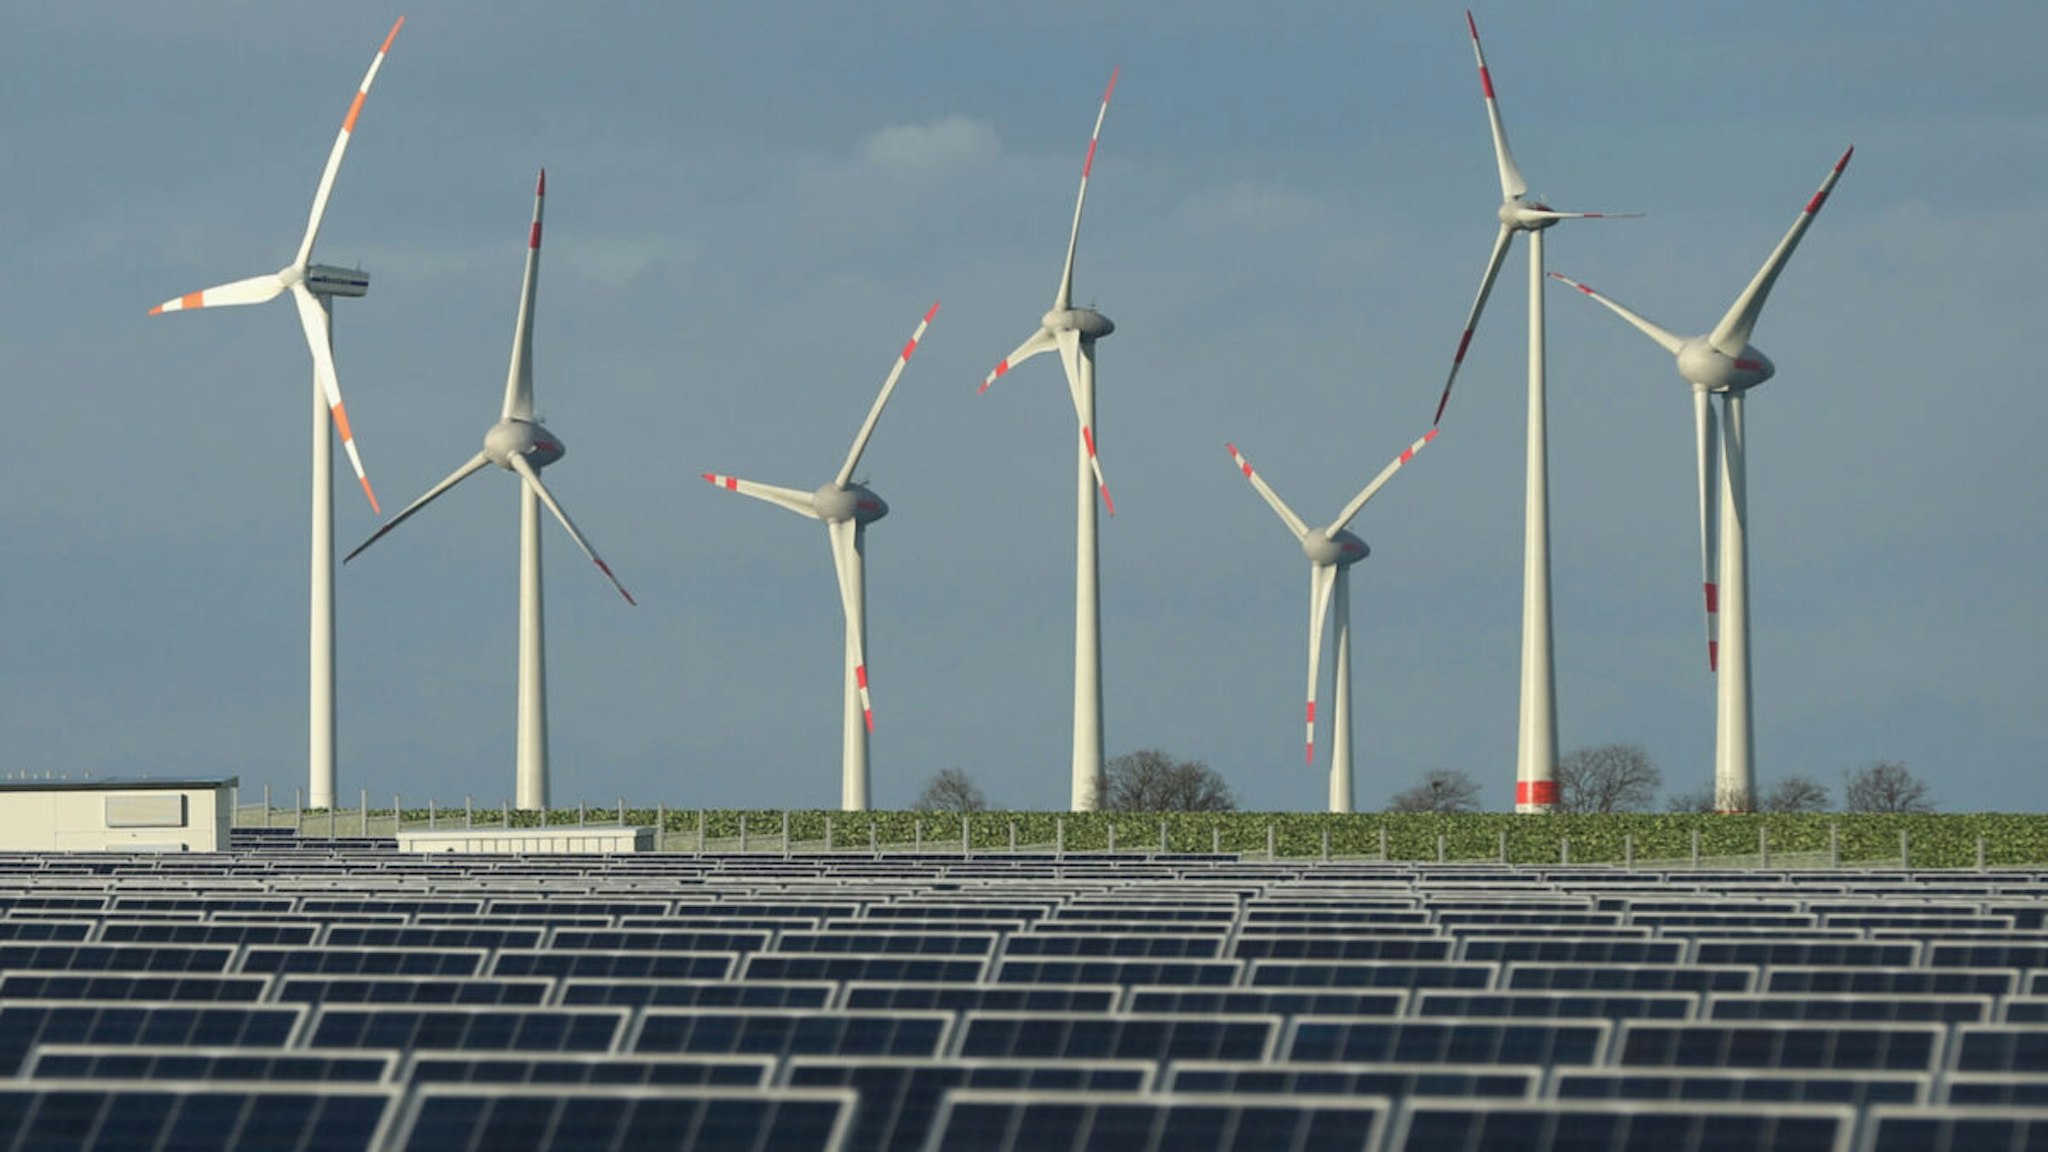 Wind turbines stand behind a solar power park on October 30, 2013 near Werder, Germany.